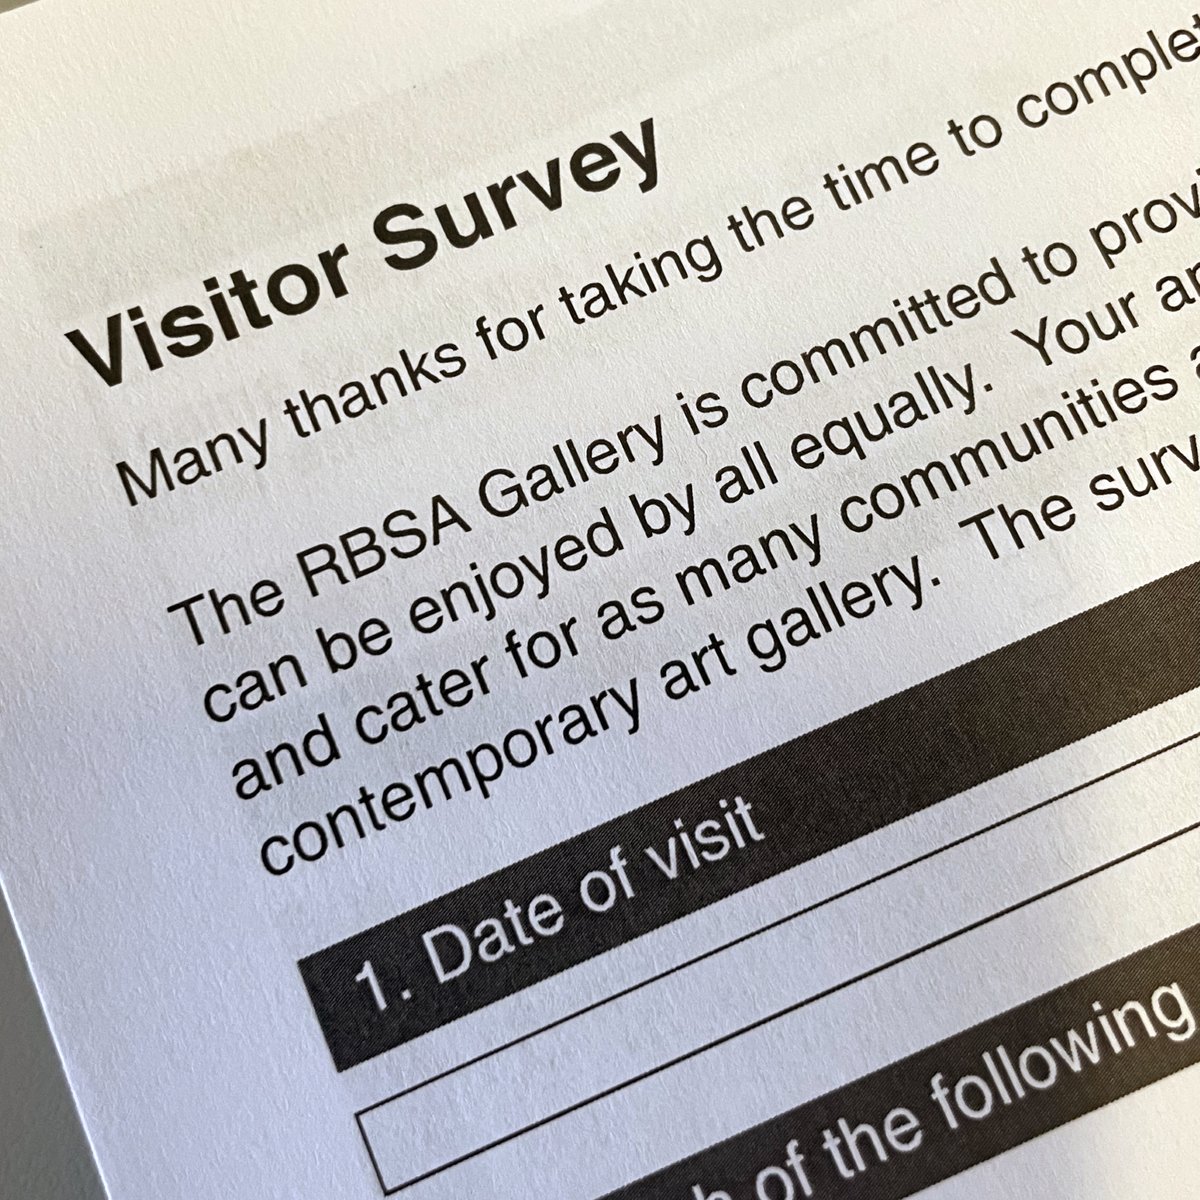 Next time you visit the Gallery, please spare a couple of minutes to complete our anonymous visitor survey.

We're committed to providing an inclusive and inspiring space that reaches and caters for as many communities as possible.

#audiencedevelopment #inclusivity #diversity